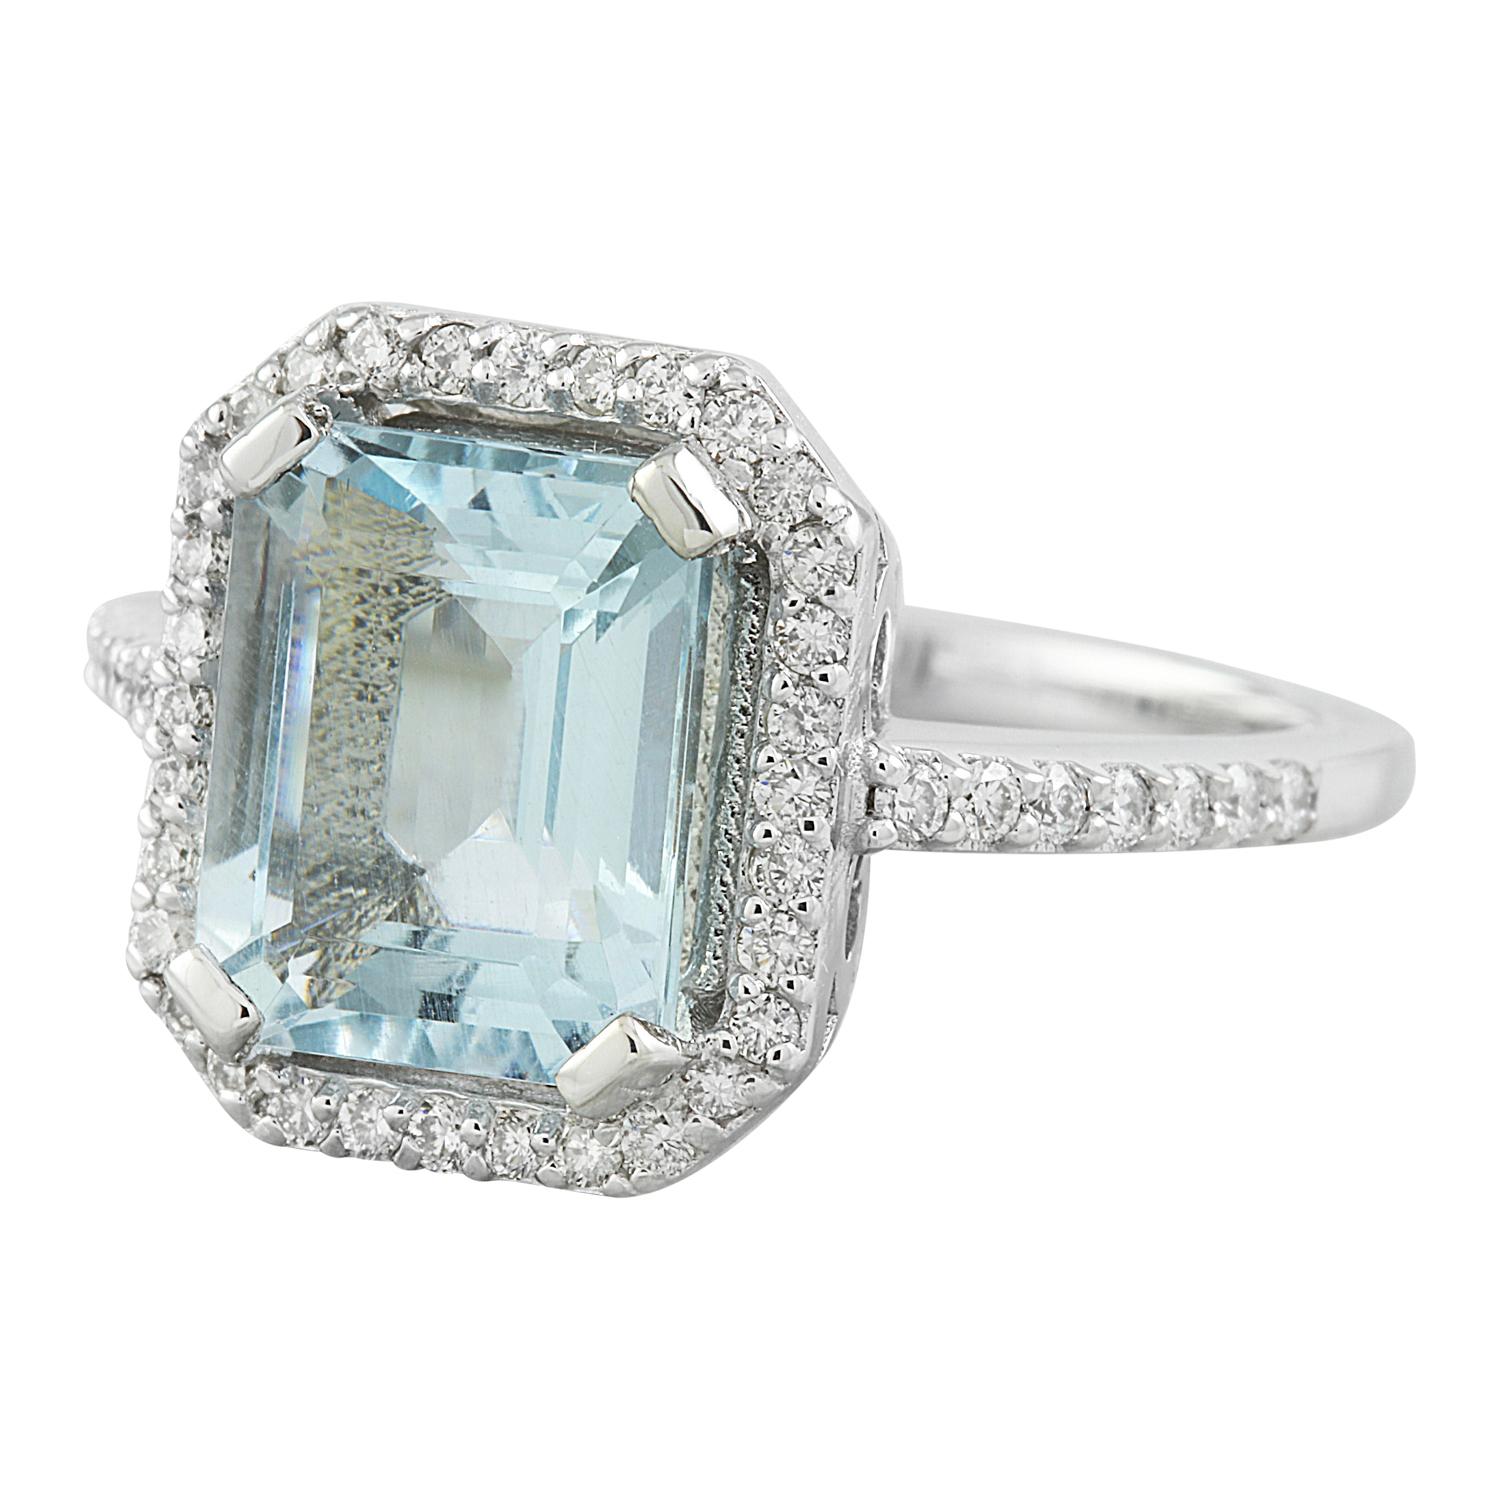 Introducing a captivating masterpiece of elegance and sophistication - the 3.53 Carat Natural Aquamarine 14K Solid White Gold Diamond Ring. This ring is a symbol of luxury and refinement.

Crafted to perfection, this ring, sized for a size 7 finger,